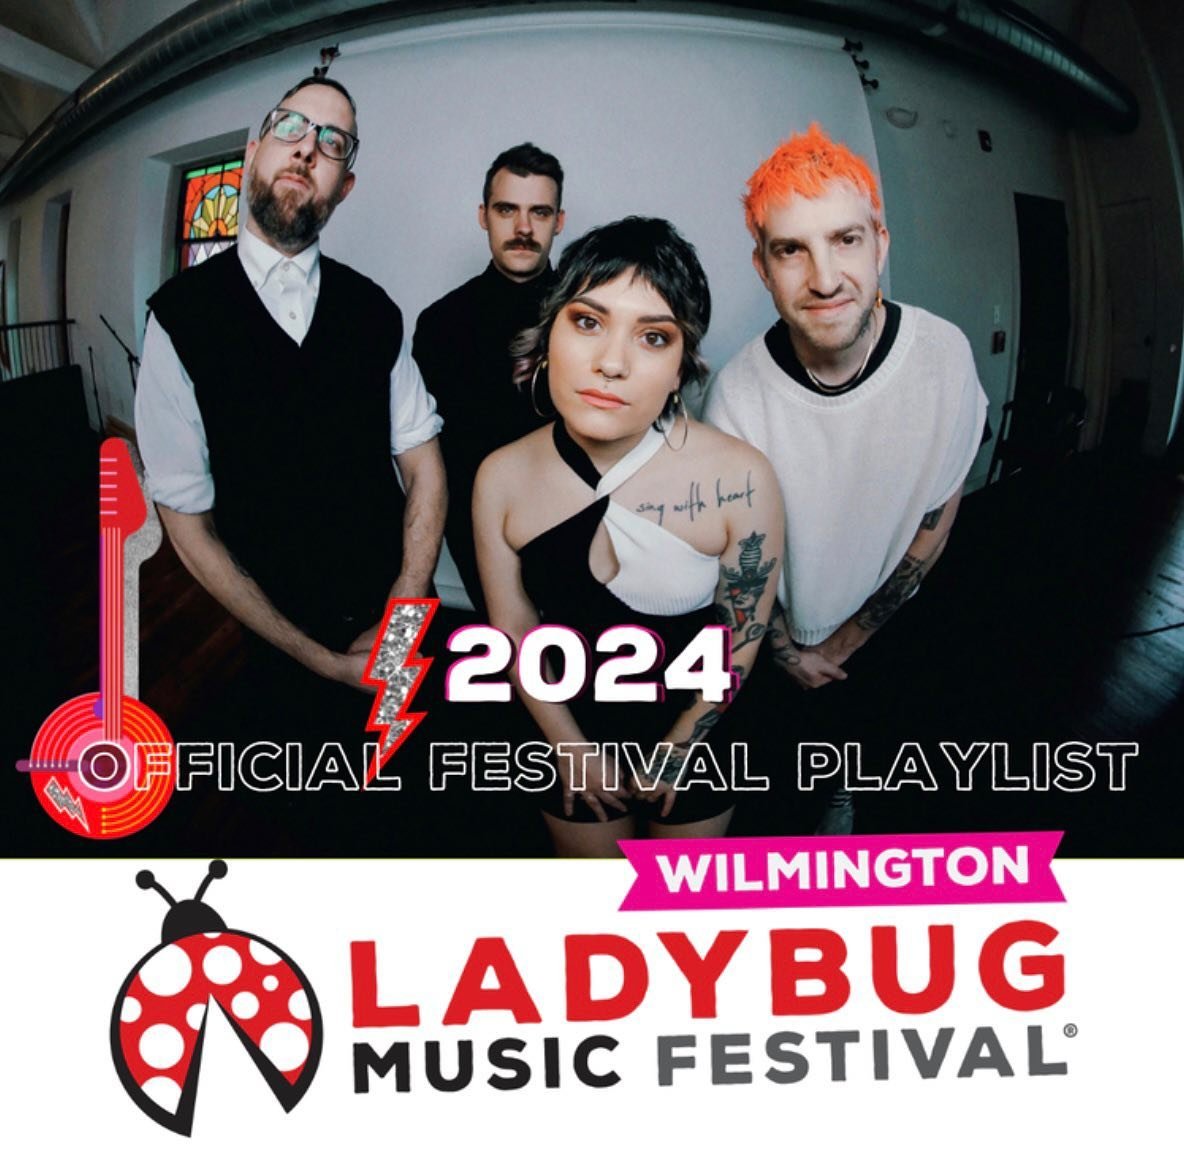 The 2024 Wilmington Ladybug Music Festival Official Spotify Playlist link is up and live for your listening pleasure in our bio! 🎧🎶 Tune in and get pumped for our celebration of women in music happening May 31st in downtown Wilmington! ❤️🐞 #ladybu